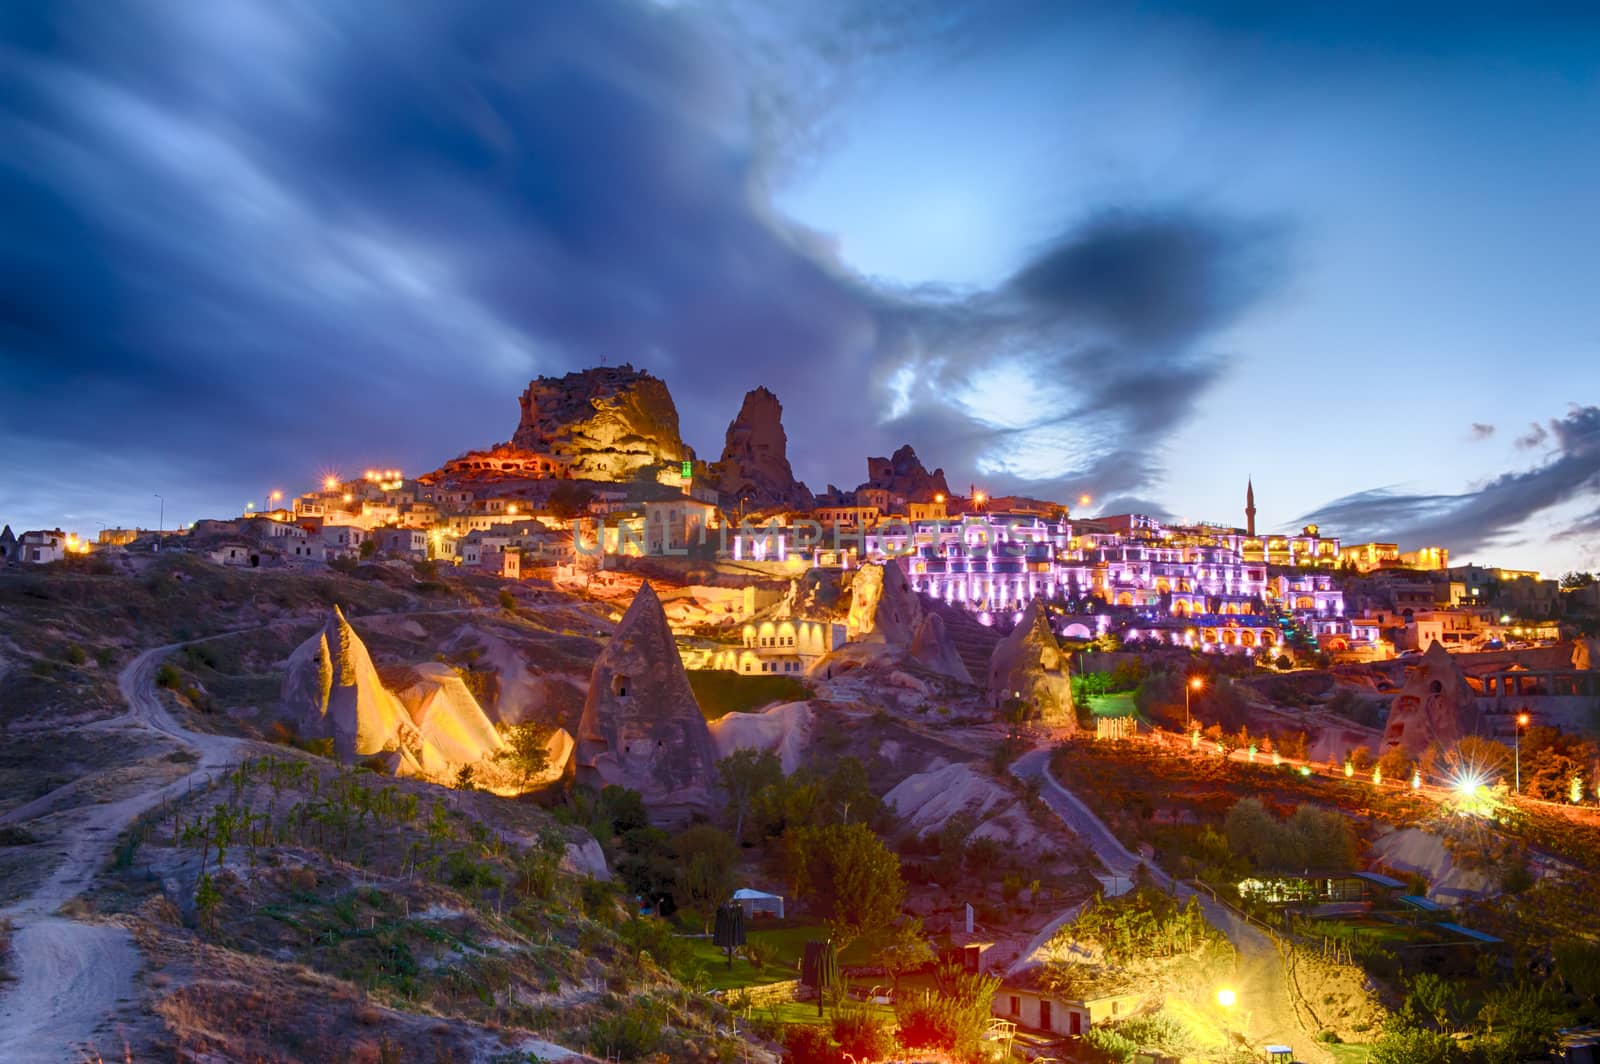 Ancient town and a castle of Uchisar dug from a mountains after twilight, Cappadocia, Turkey